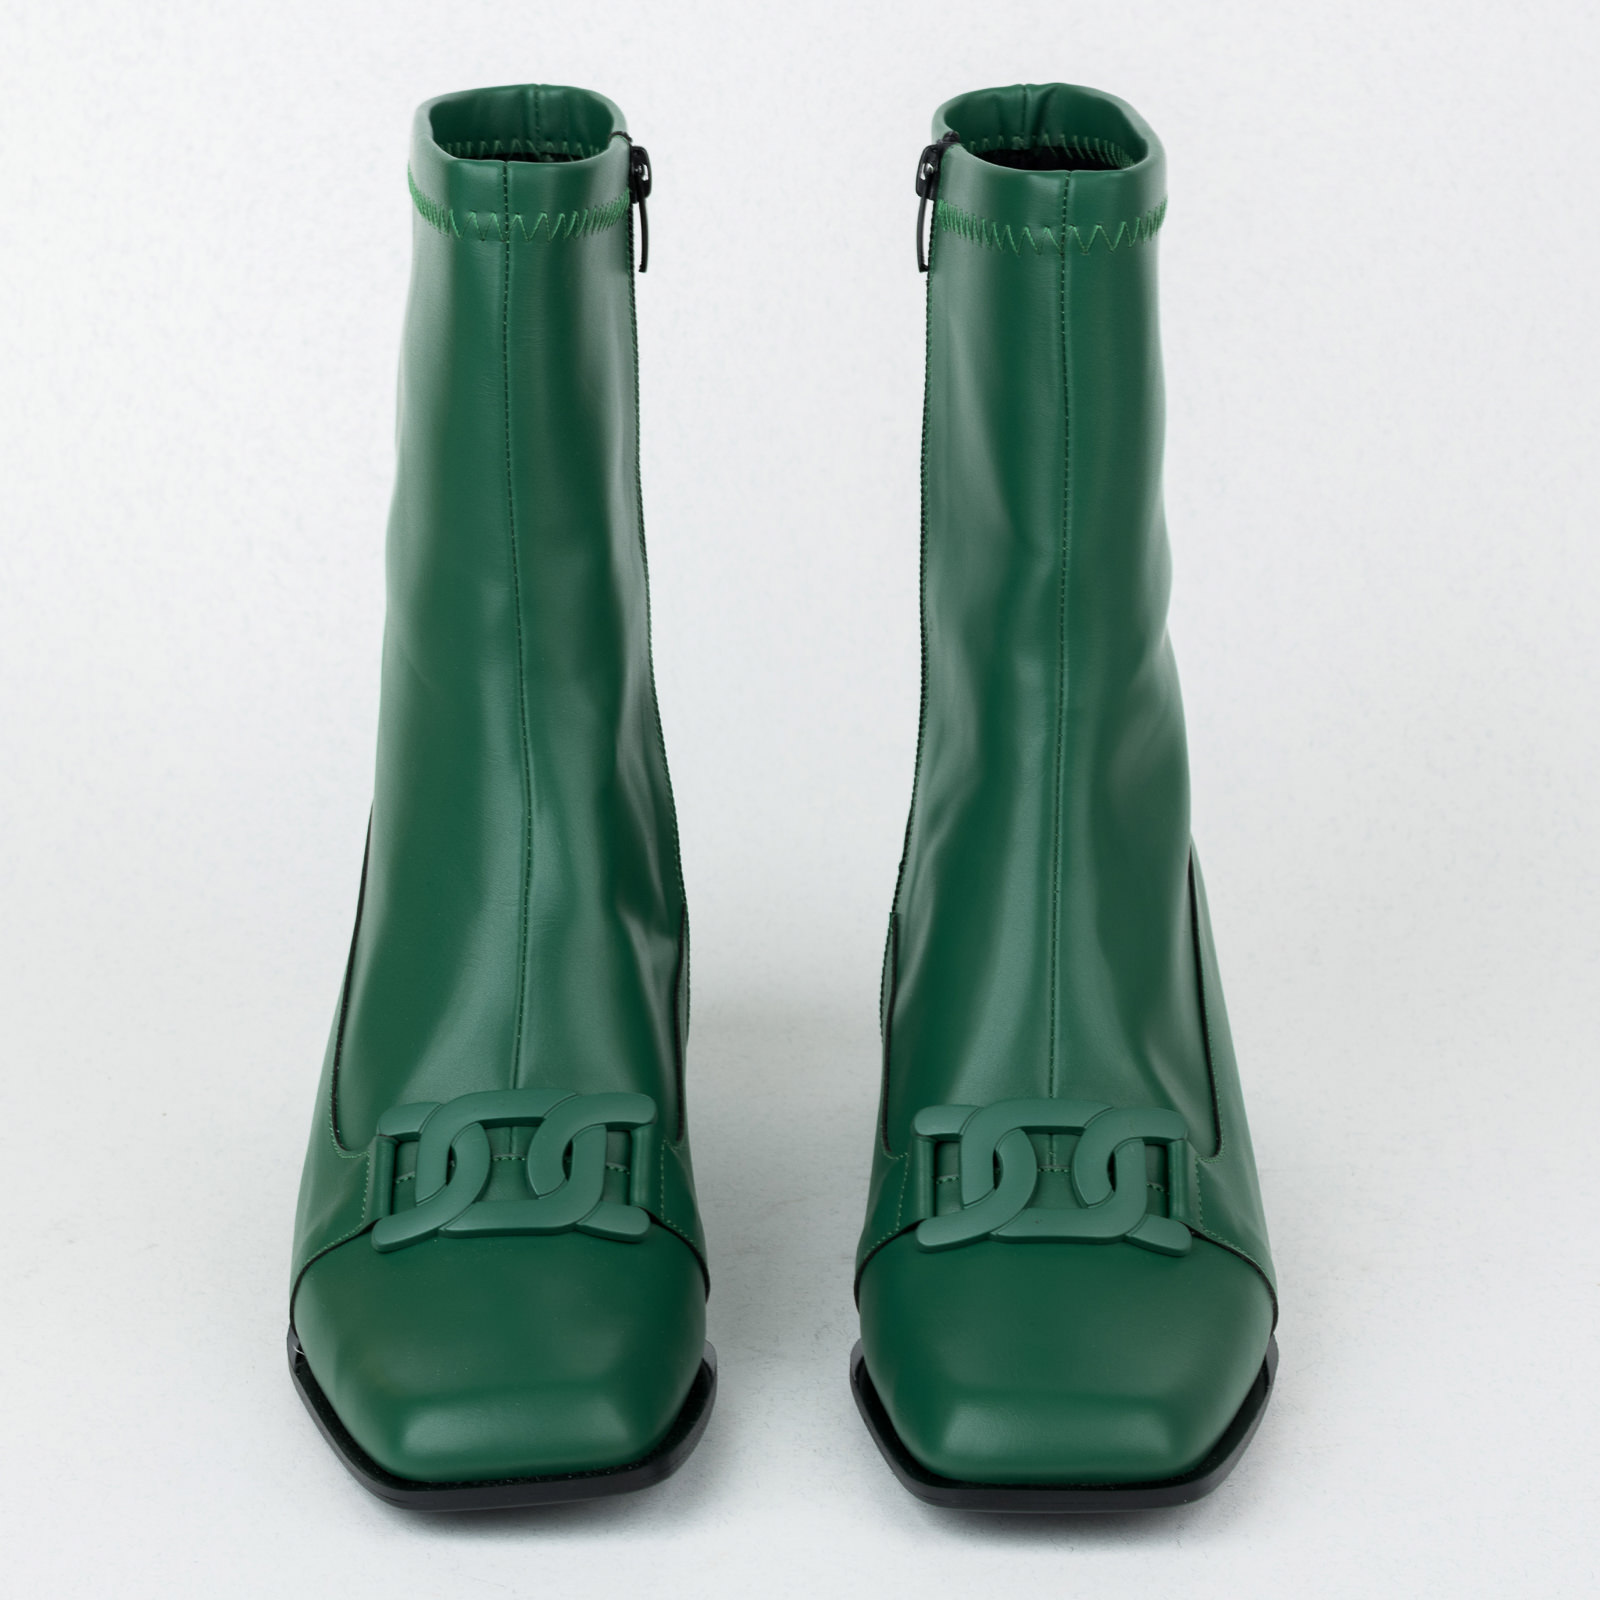 Women ankle boots B496 - GREEN